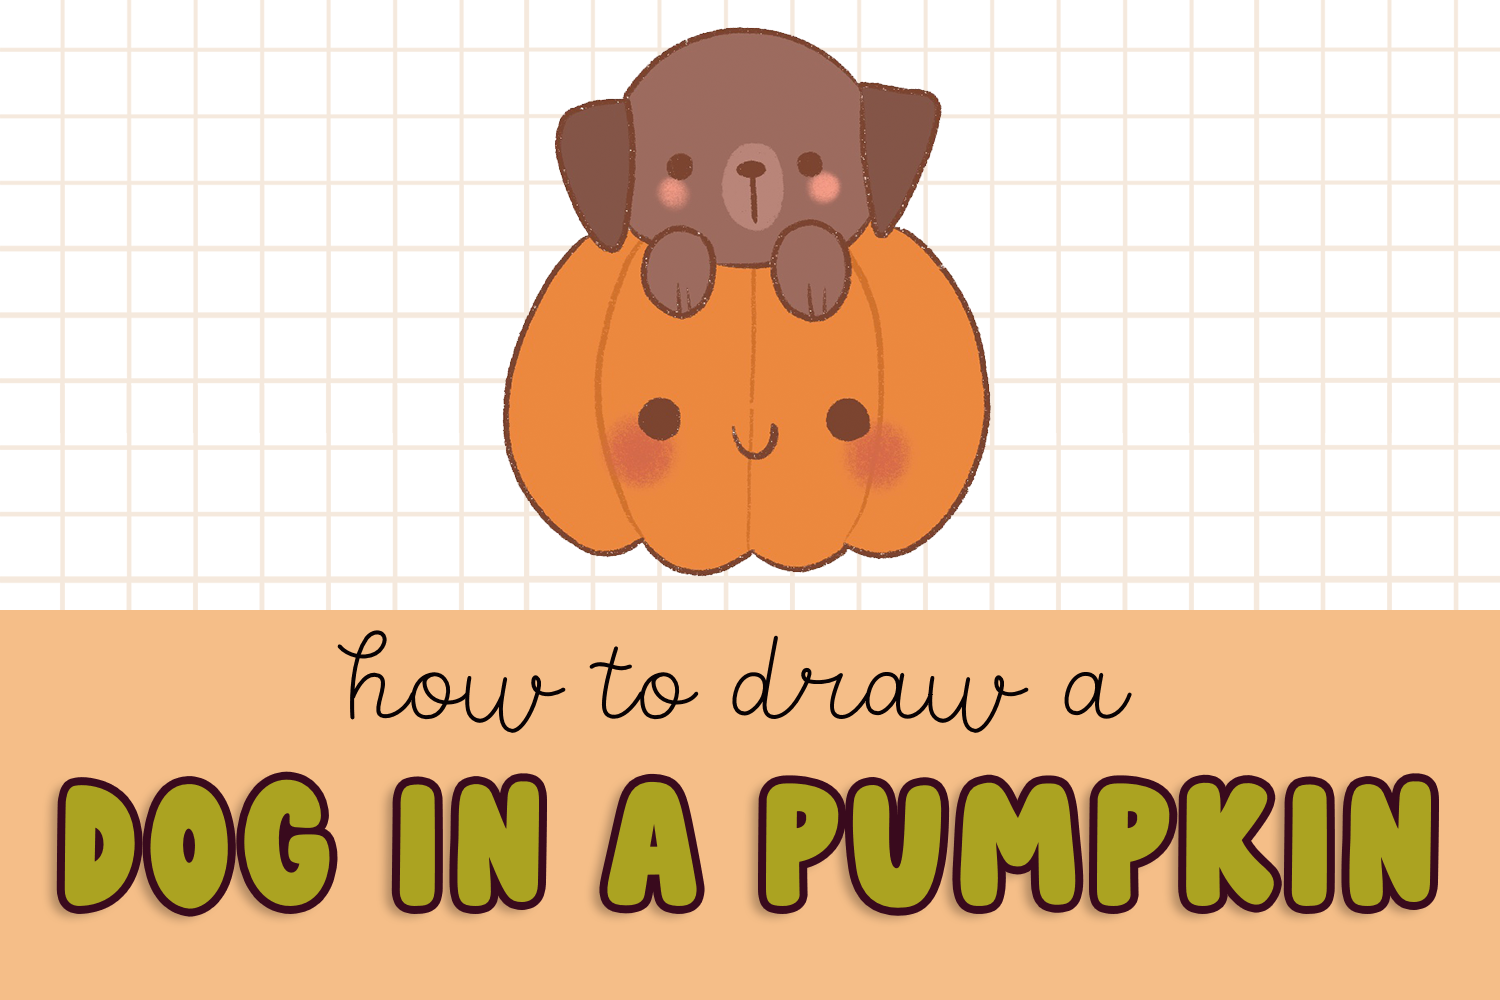 How to Draw a Puppy in a Pumpkin Easy Step by Step